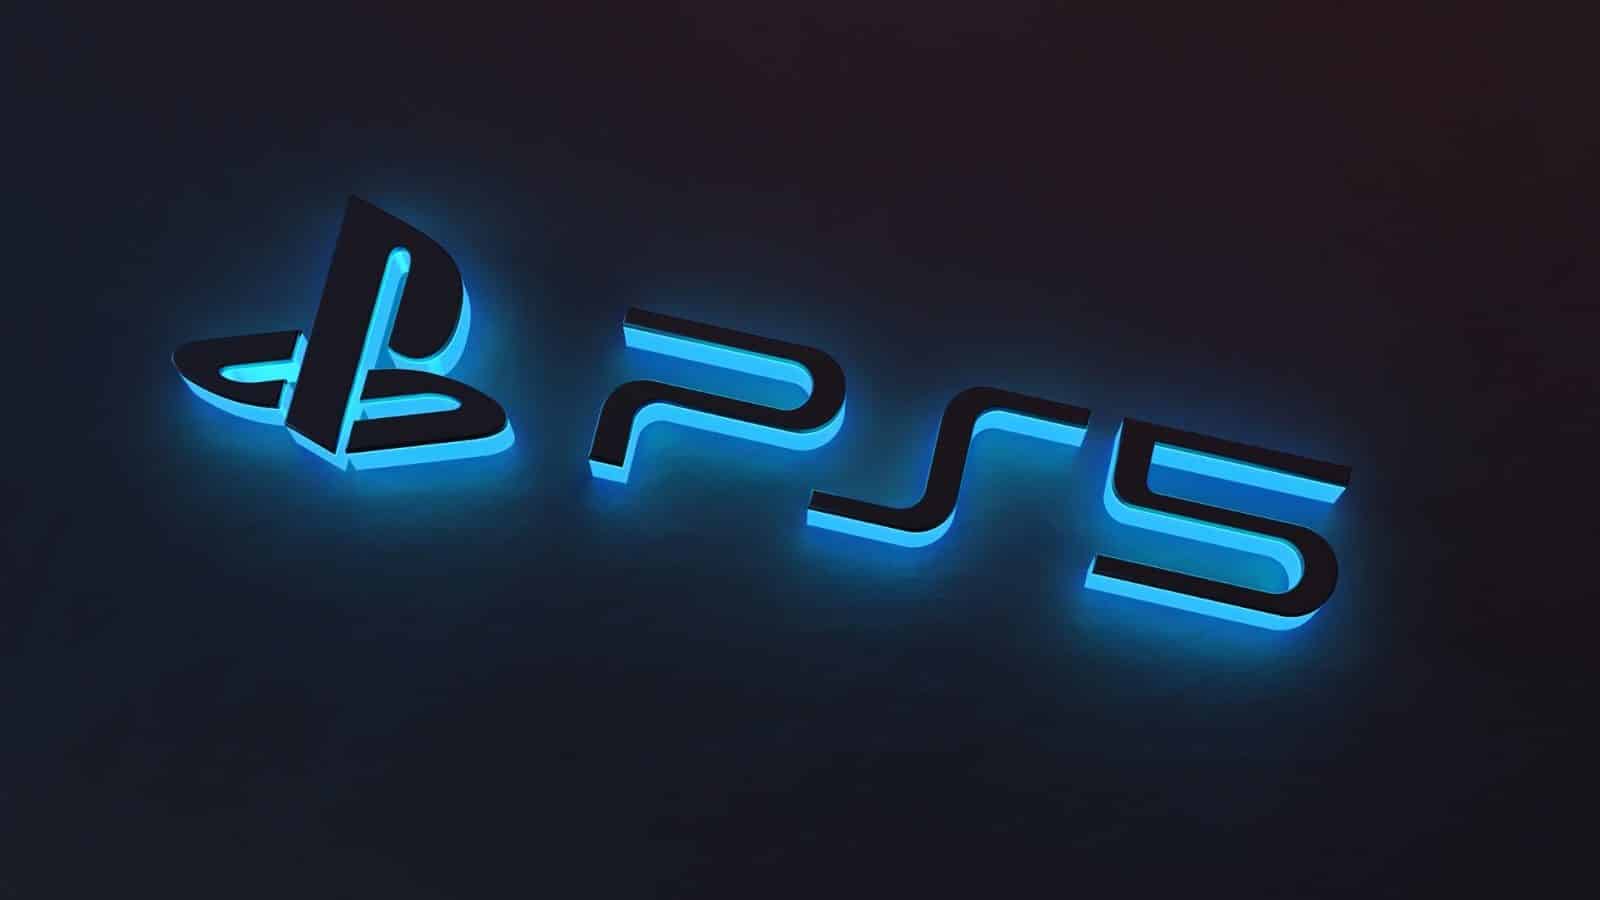 The Game Changing Playstation 5